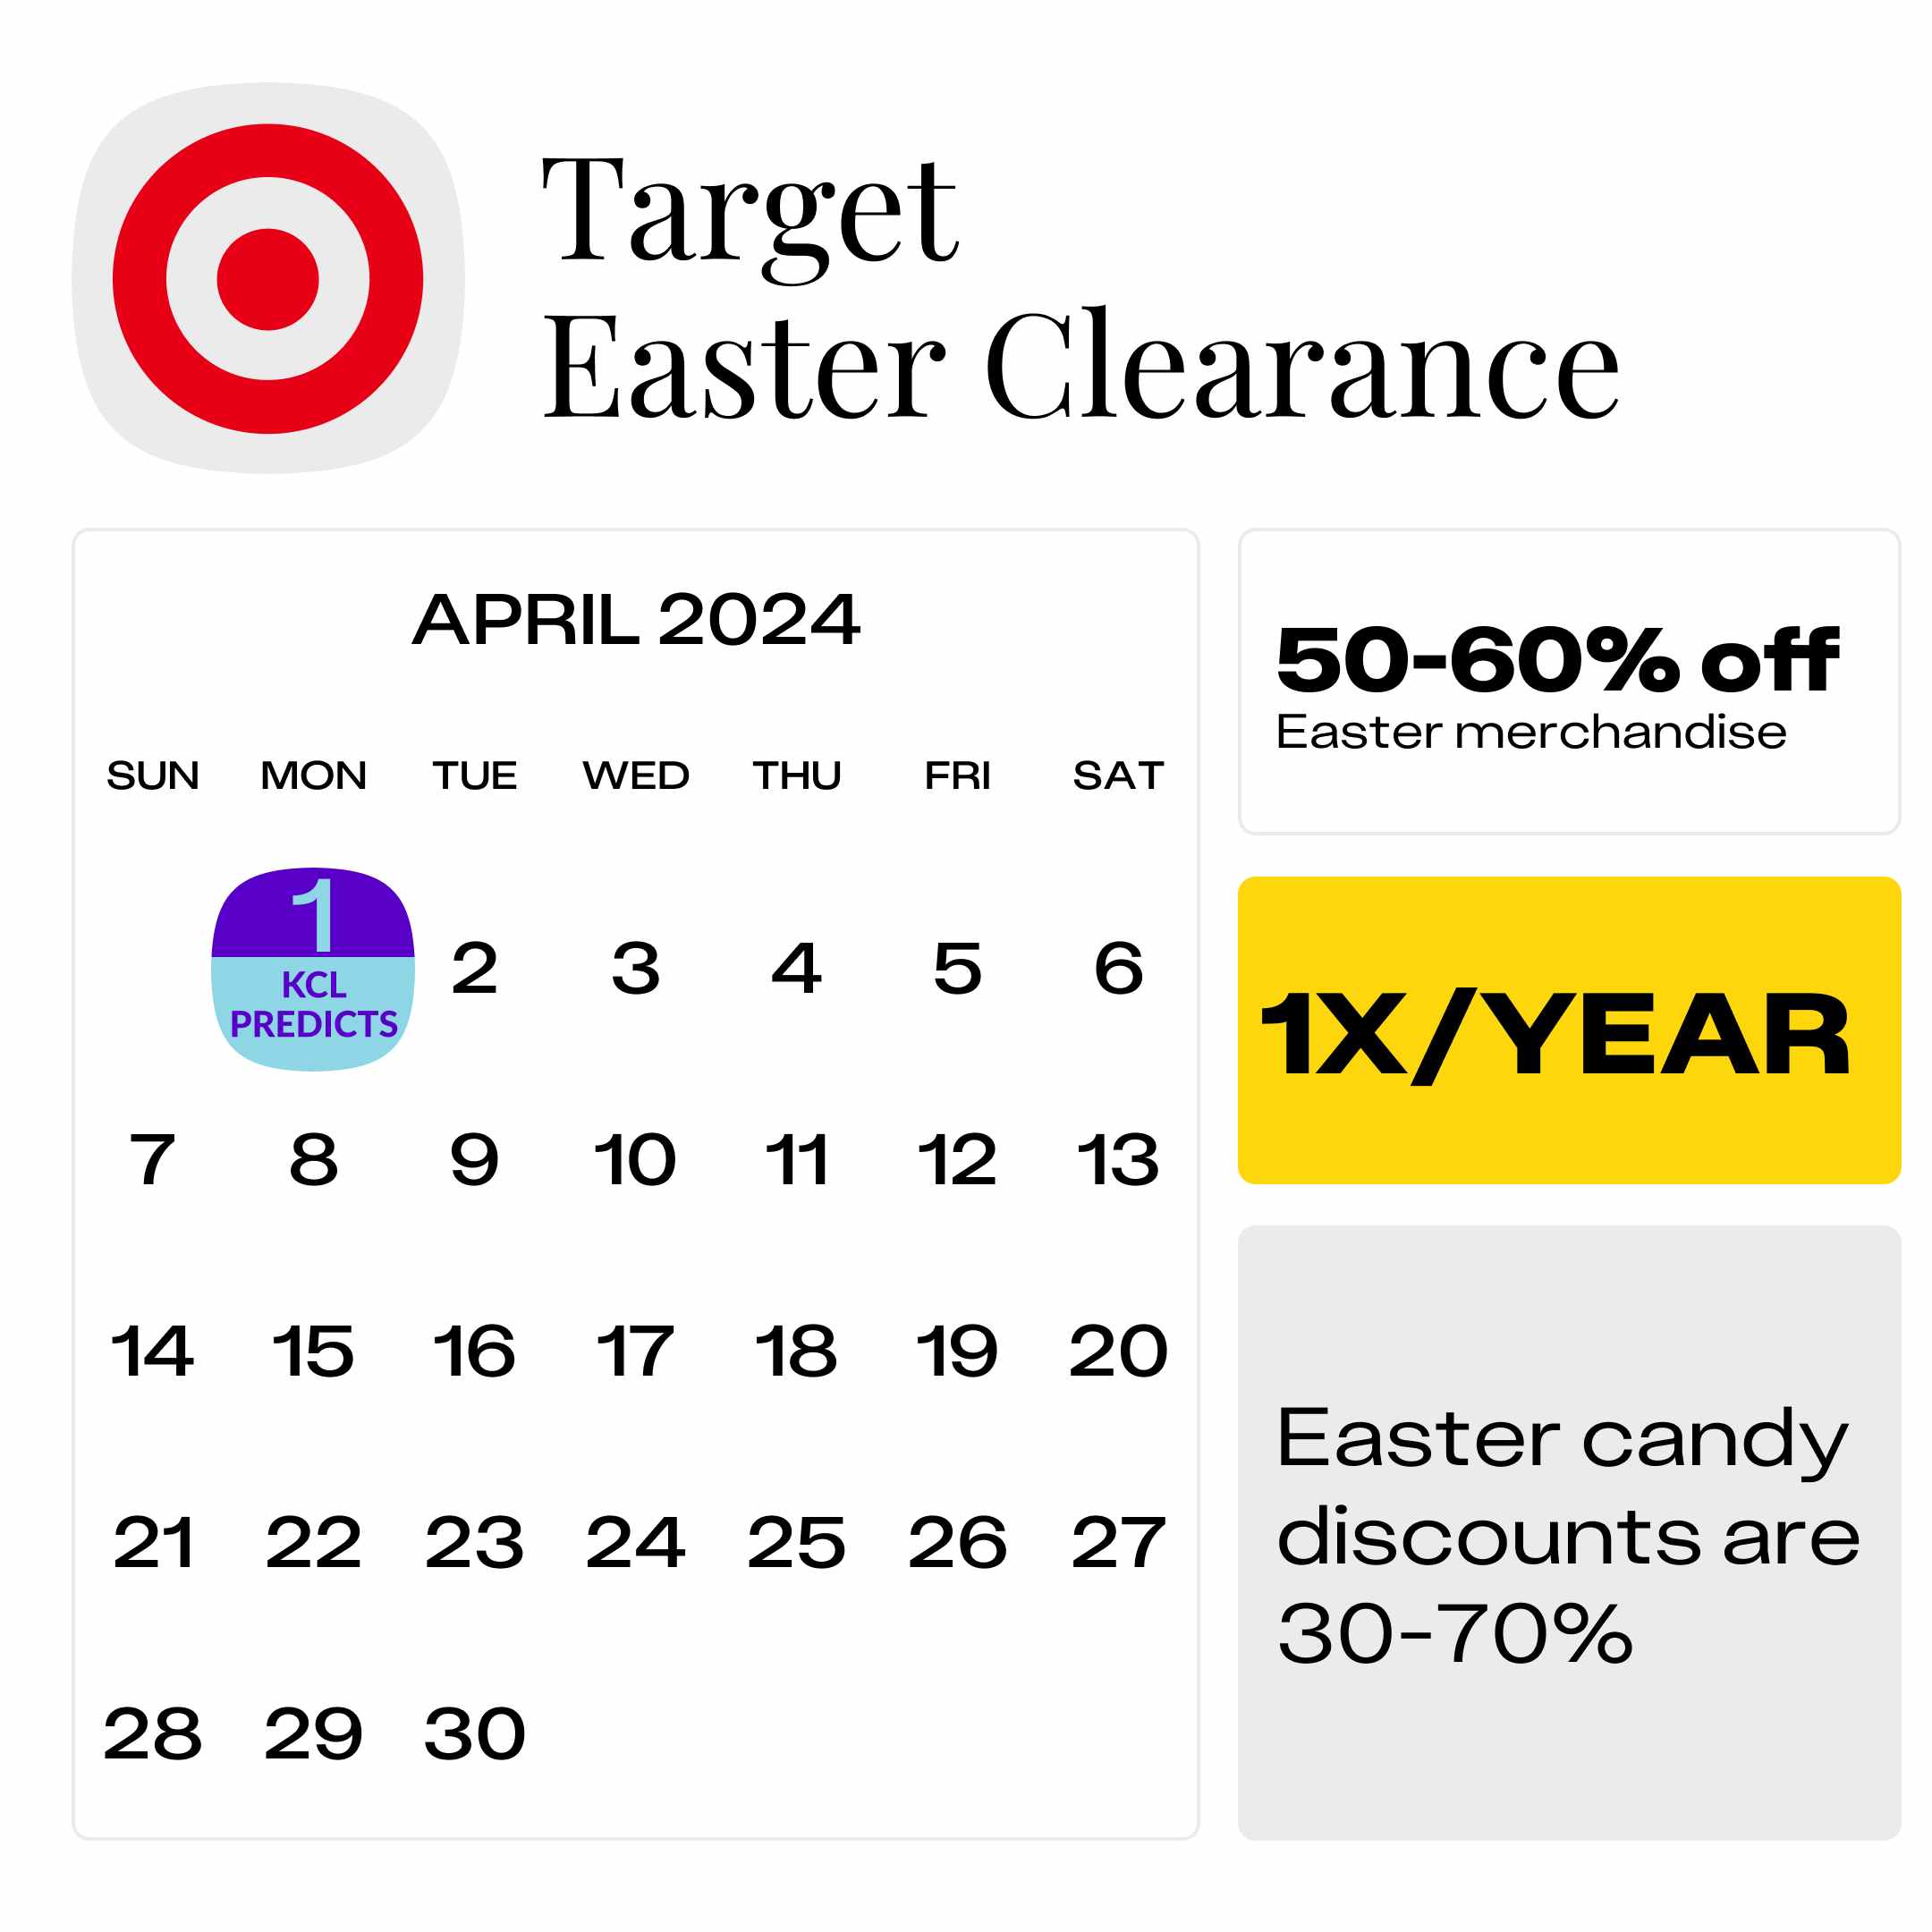 Target-Easter-Clearance